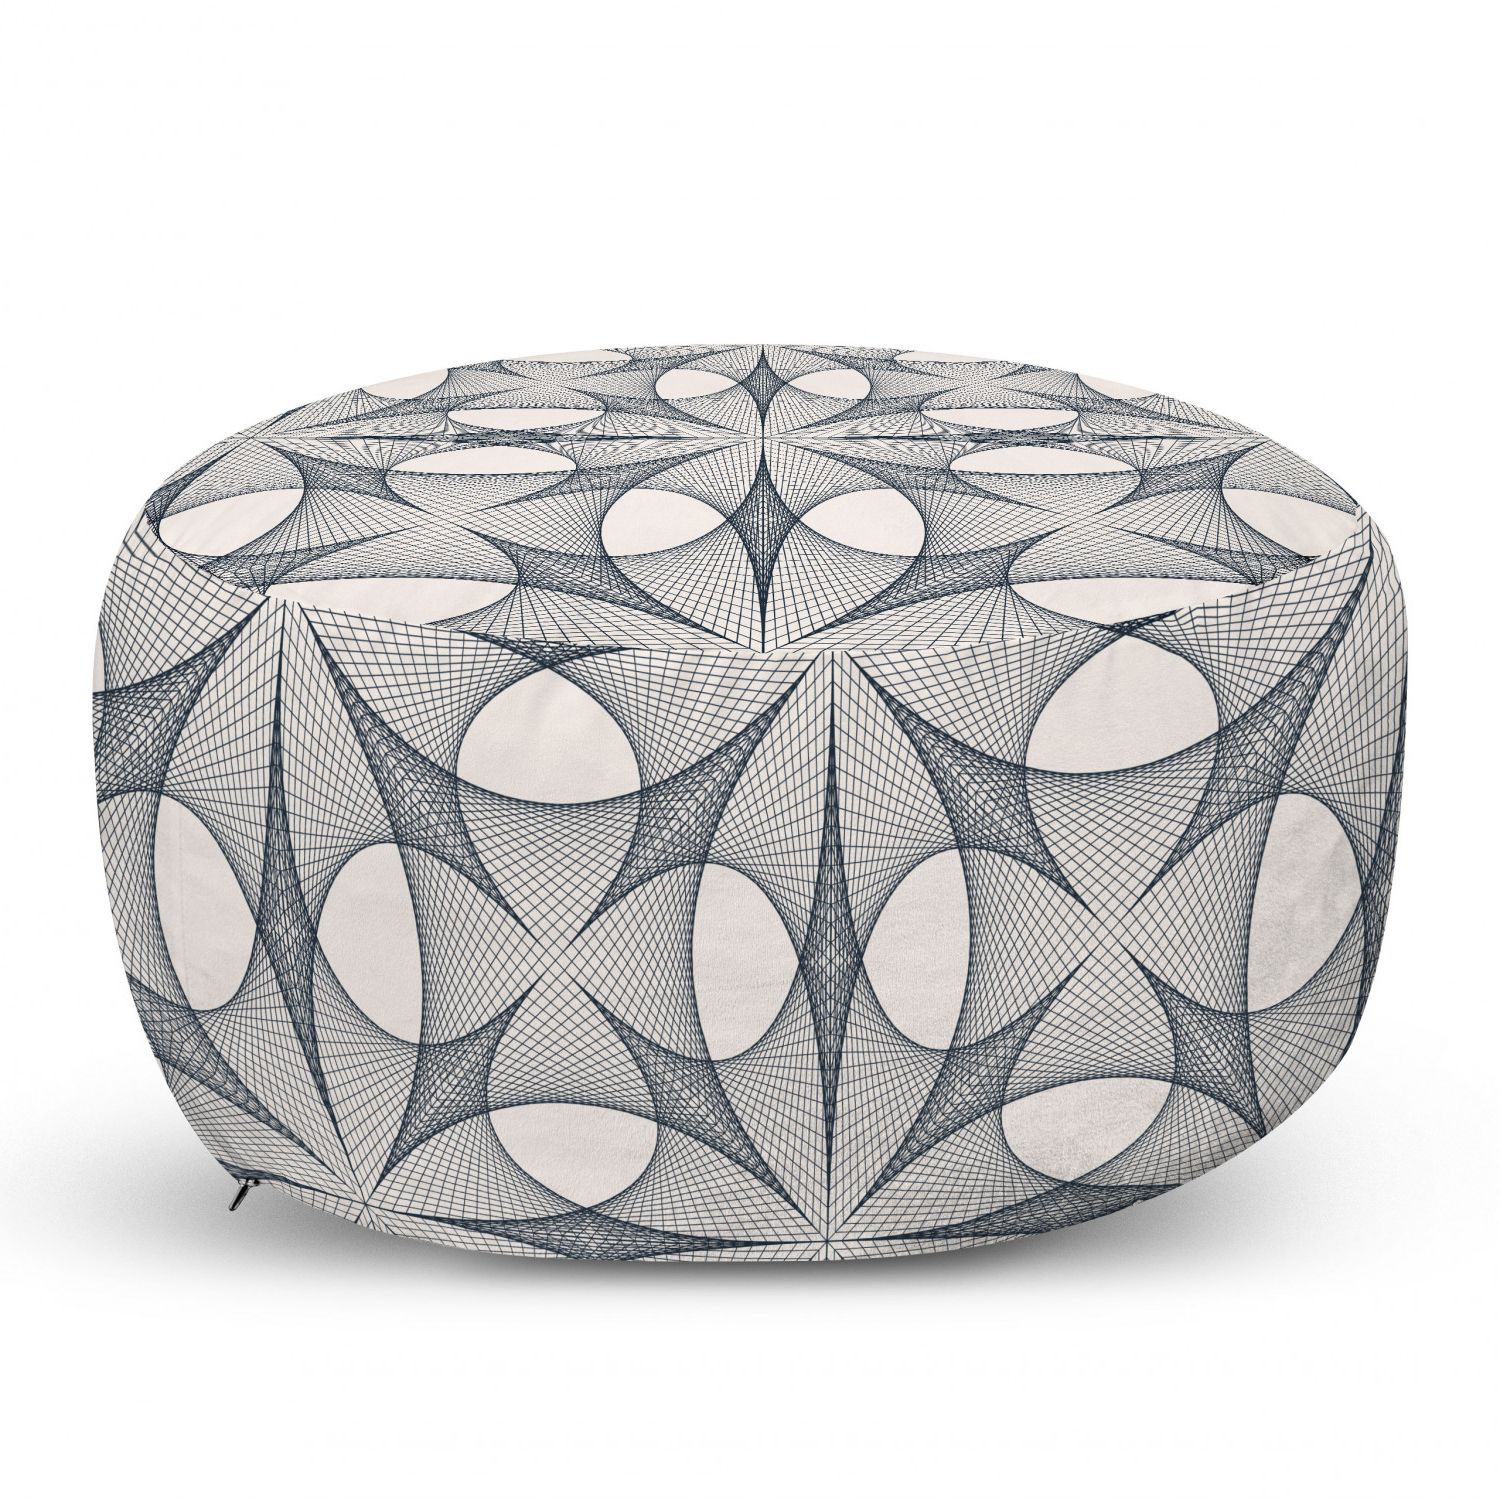 Geometric Ottoman Pouf, Angular Shapes With Stripes Monochrome Illustration  Ornamental Line Art, Decorative Soft Foot Rest With Removable Cover Living  Room And Bedroom, Ivory And Black,ambesonne – Walmart Intended For Most Popular Soft Ivory Geometric Ottomans (View 11 of 15)